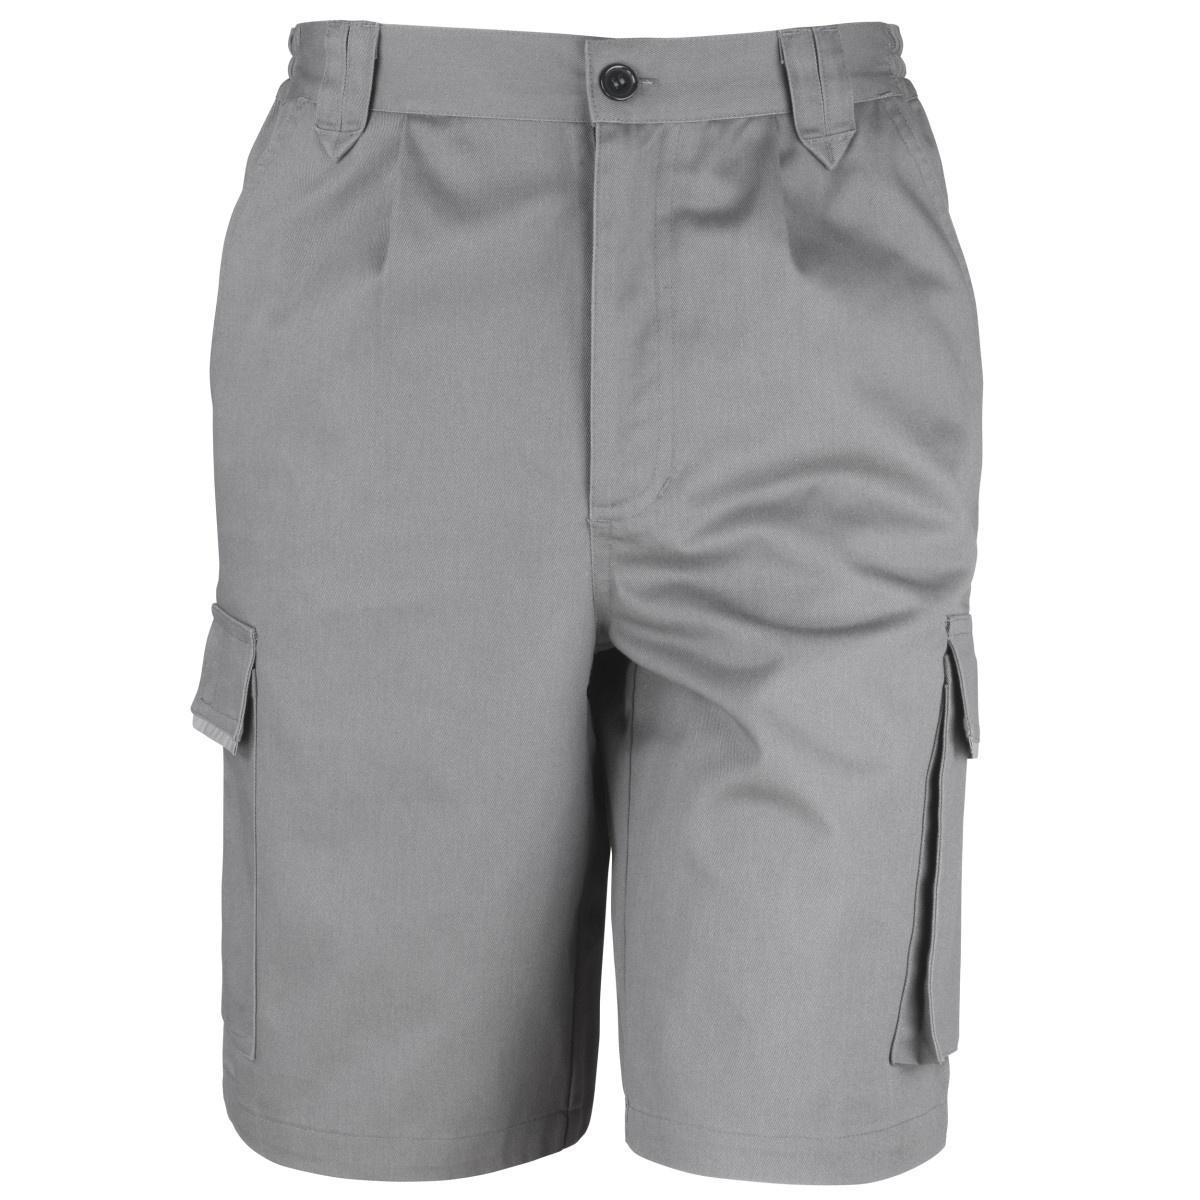 Result Unisex Work-Guard Action Shorts / Workwear (Grey) (L)